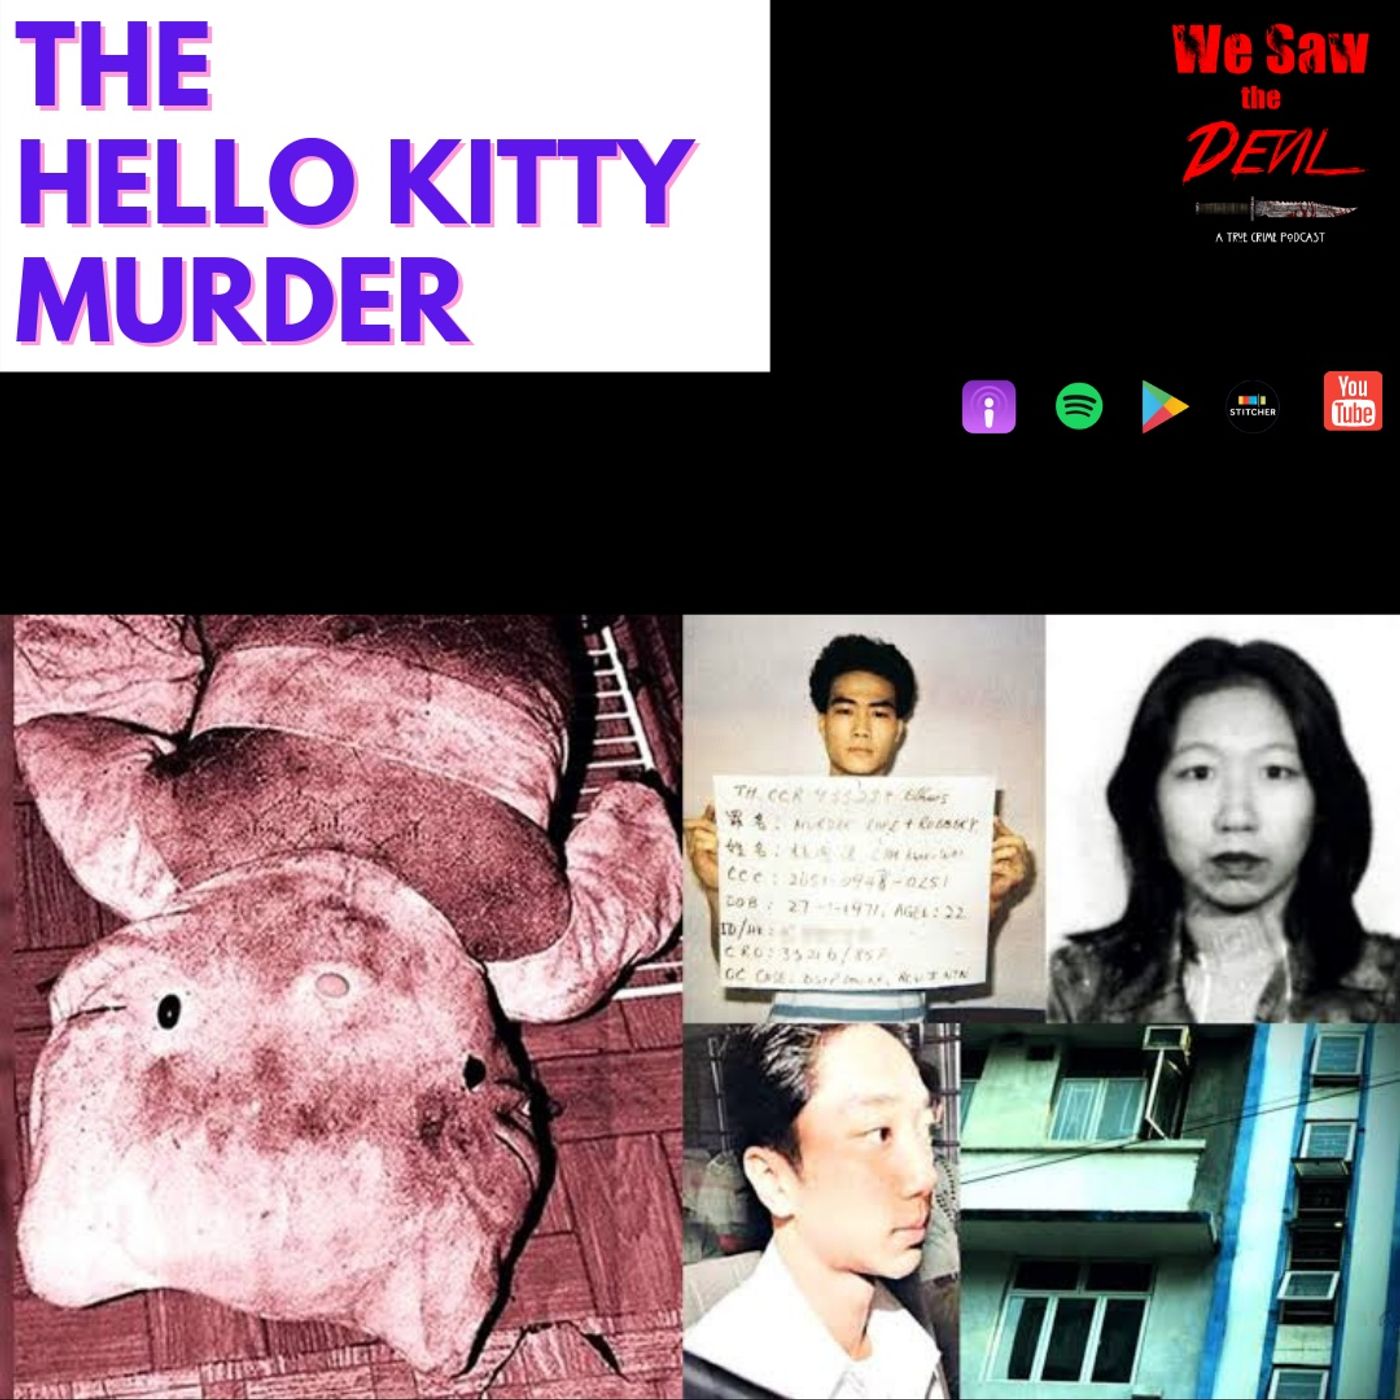 The Hello Kitty Murder (Graphic) - We Saw the Devil: A True Crime ...